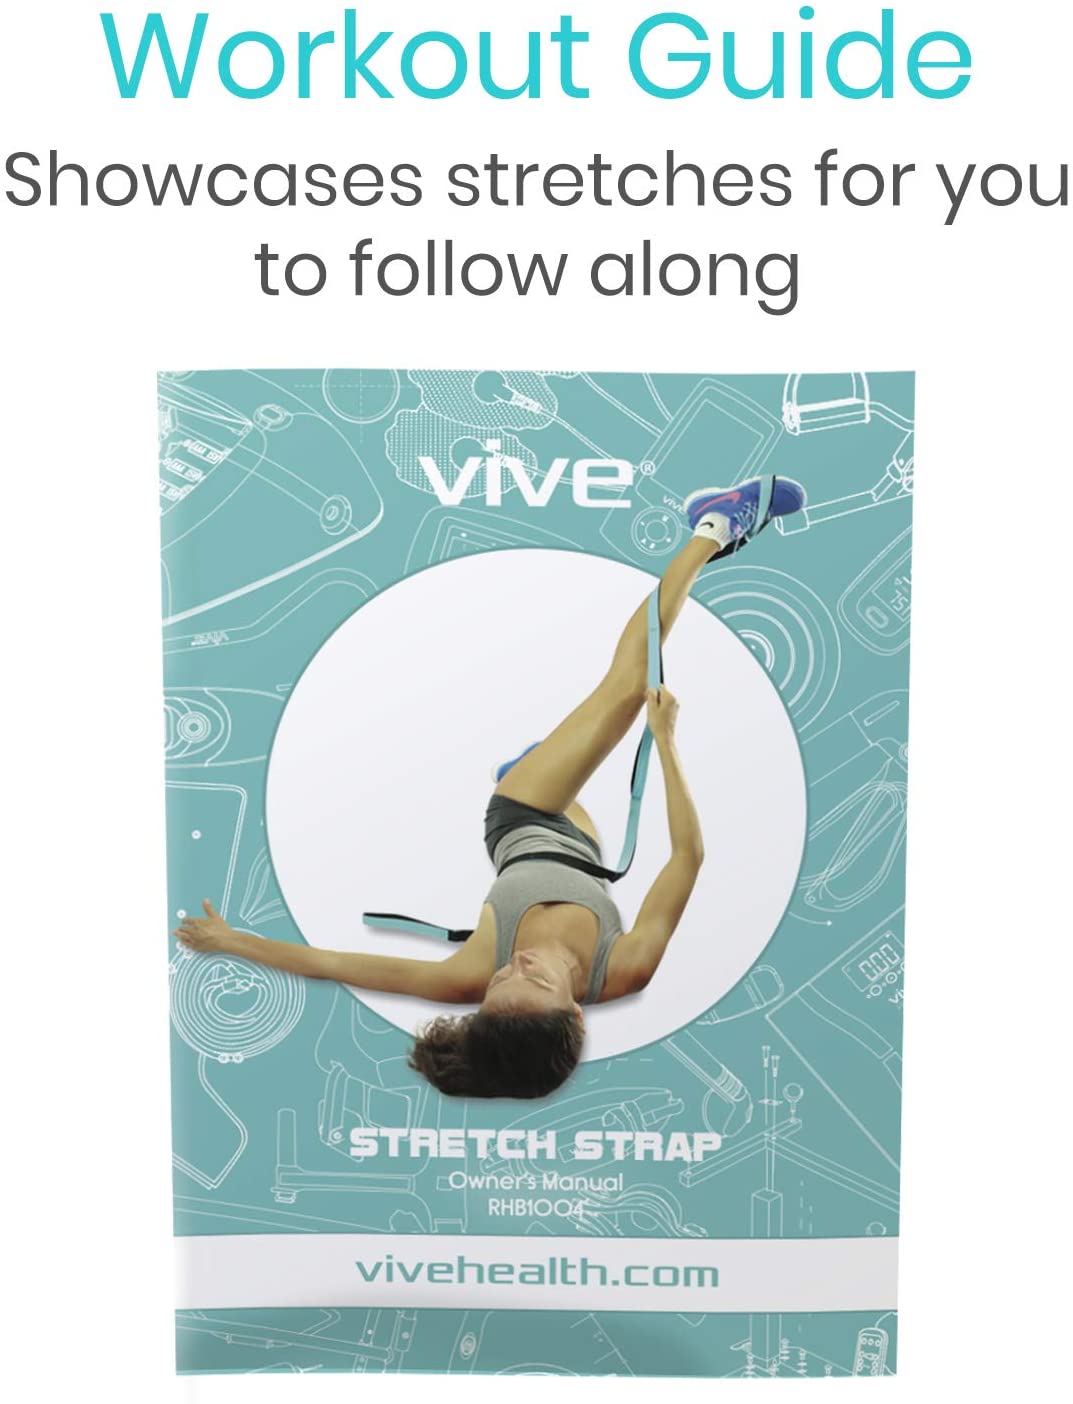 Vive Stretch Strap - Leg Stretch Band to Improve Flexibility - Stretching  Out Yoga Strap - Exercise and Physical Therapy Belt fo